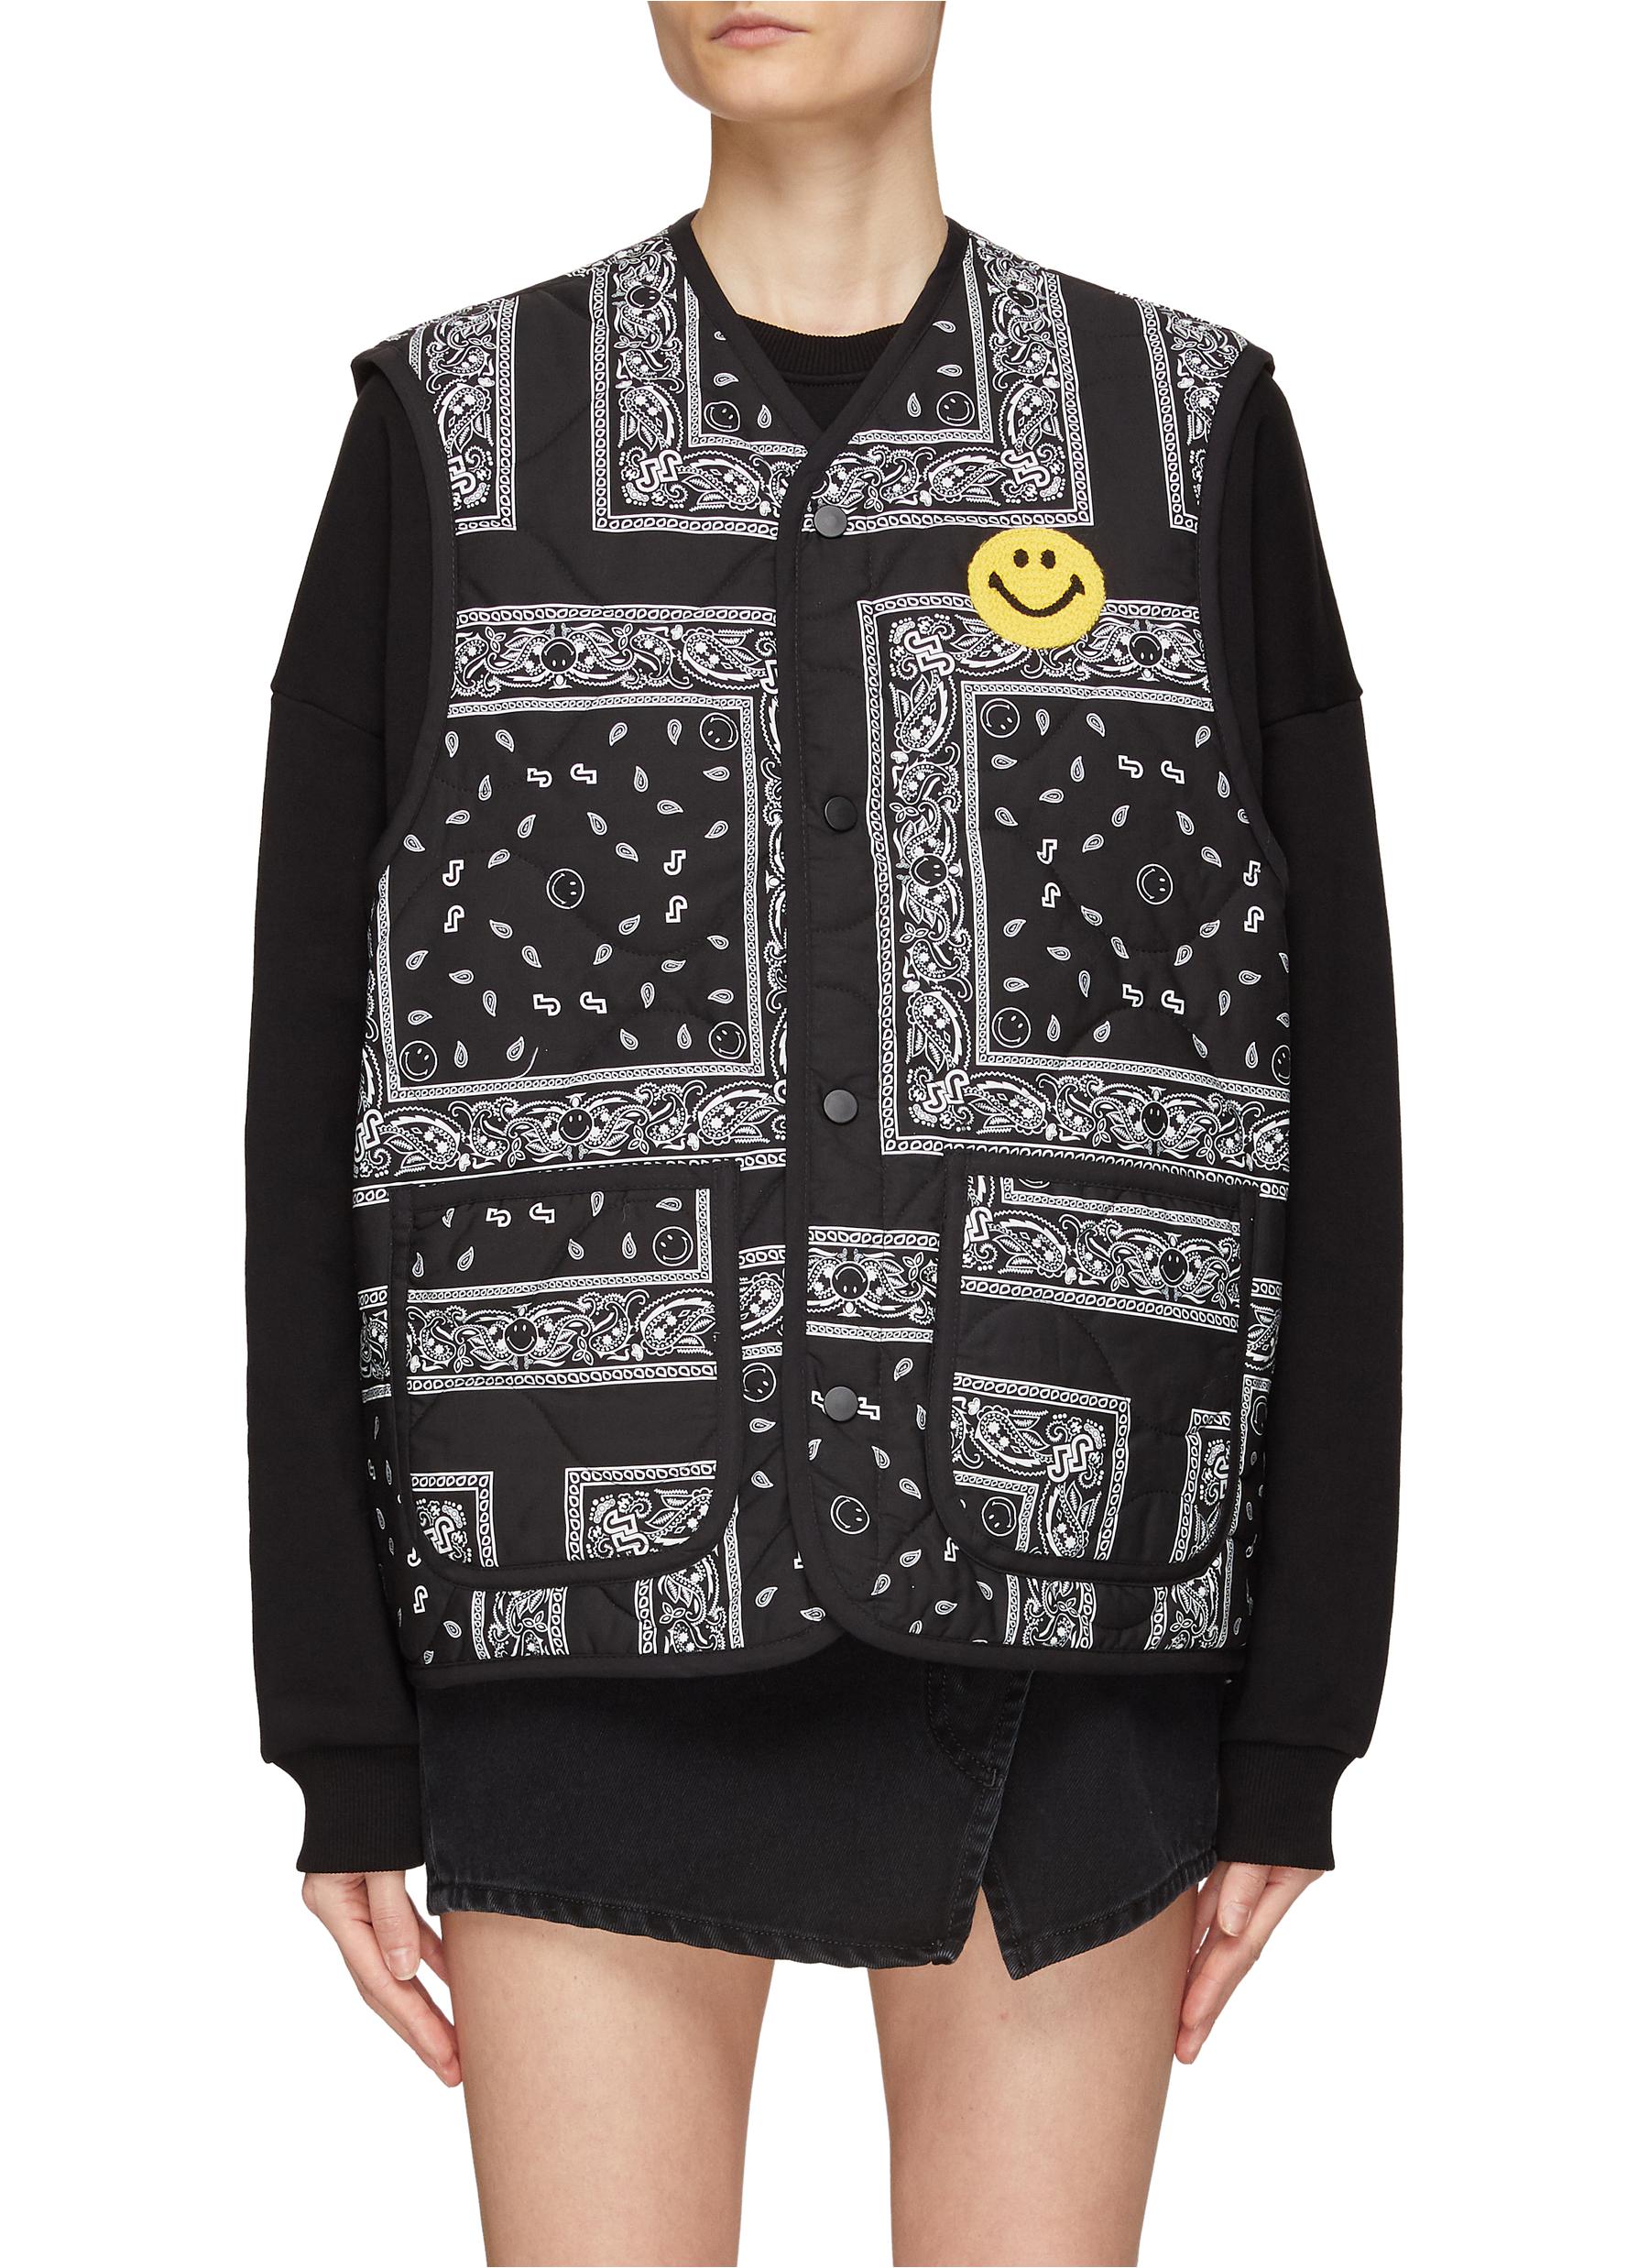 JOSHUA'S Crocheted Smiley Face Quilted Bandana Vest